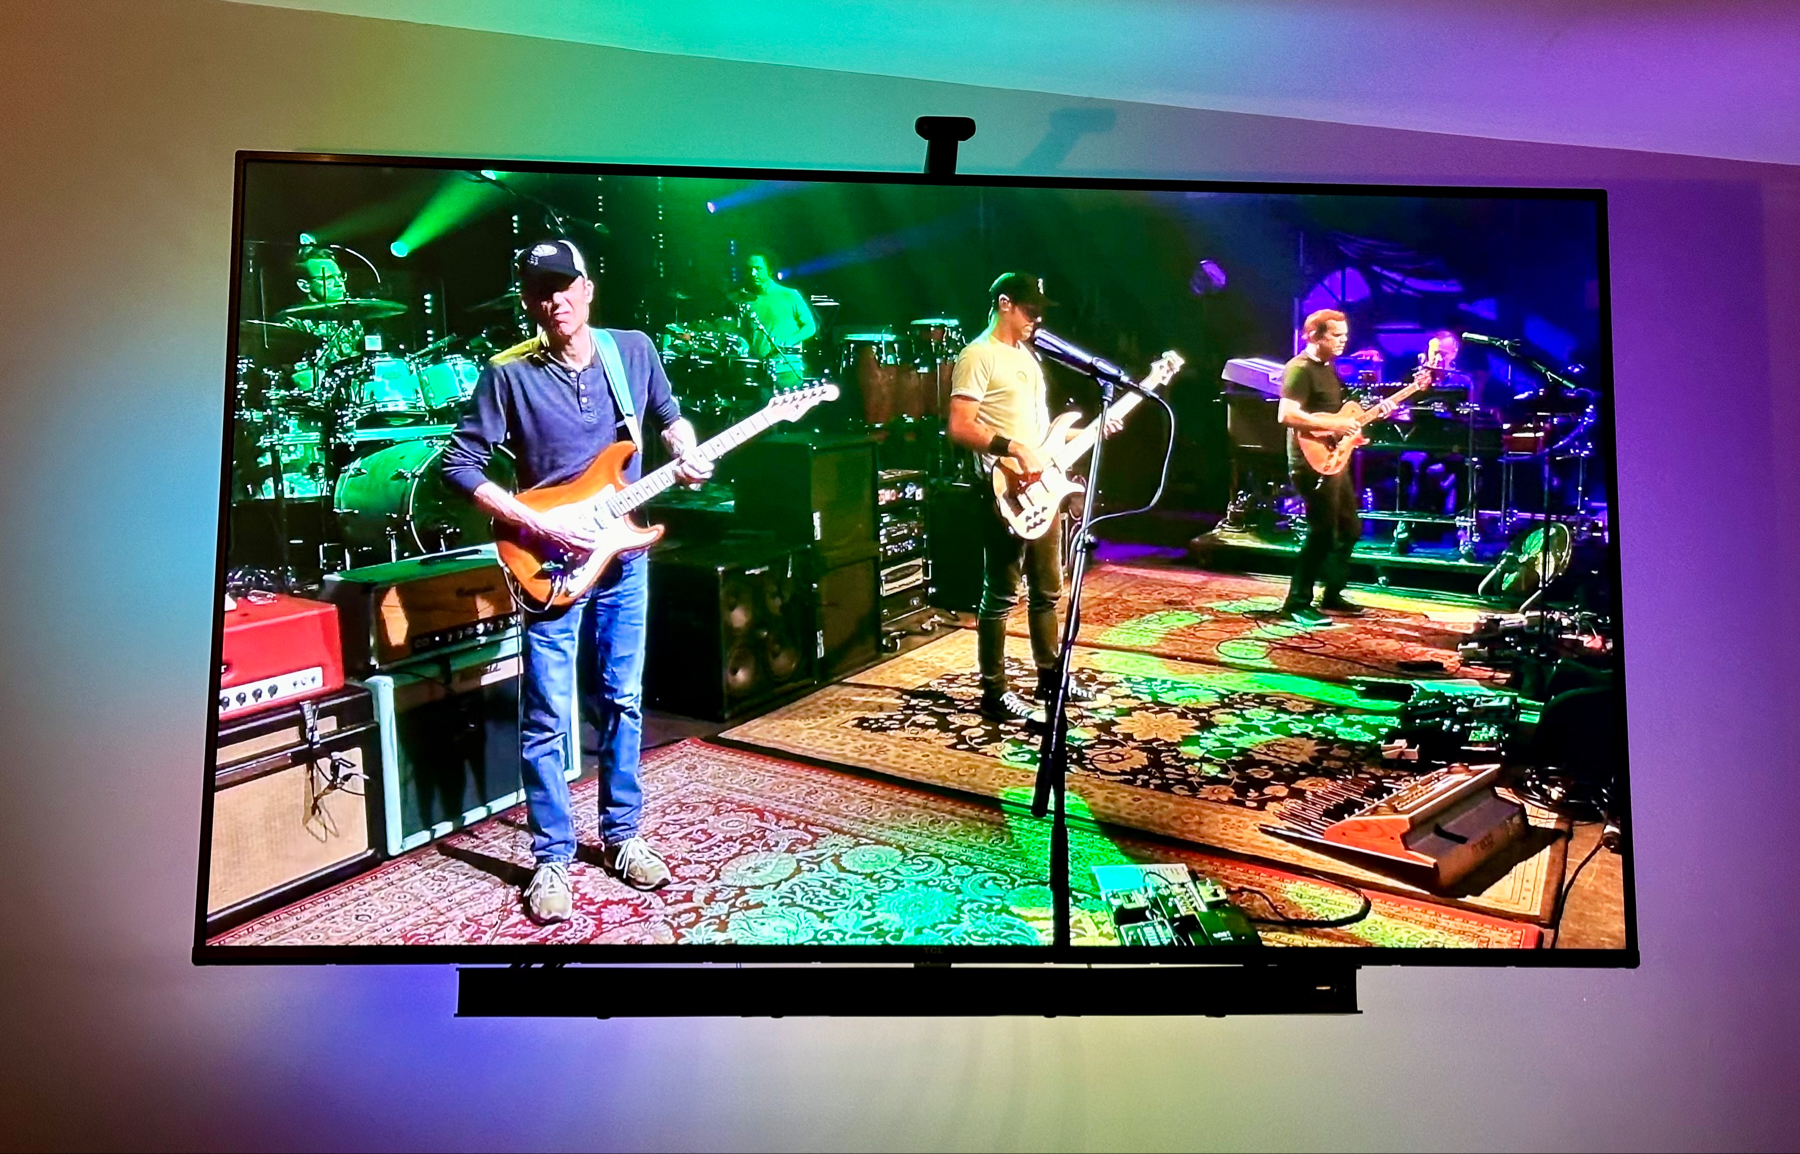 A television screen mounted on a wall displaying a live concert with musicians playing guitars and a drummer in the background.